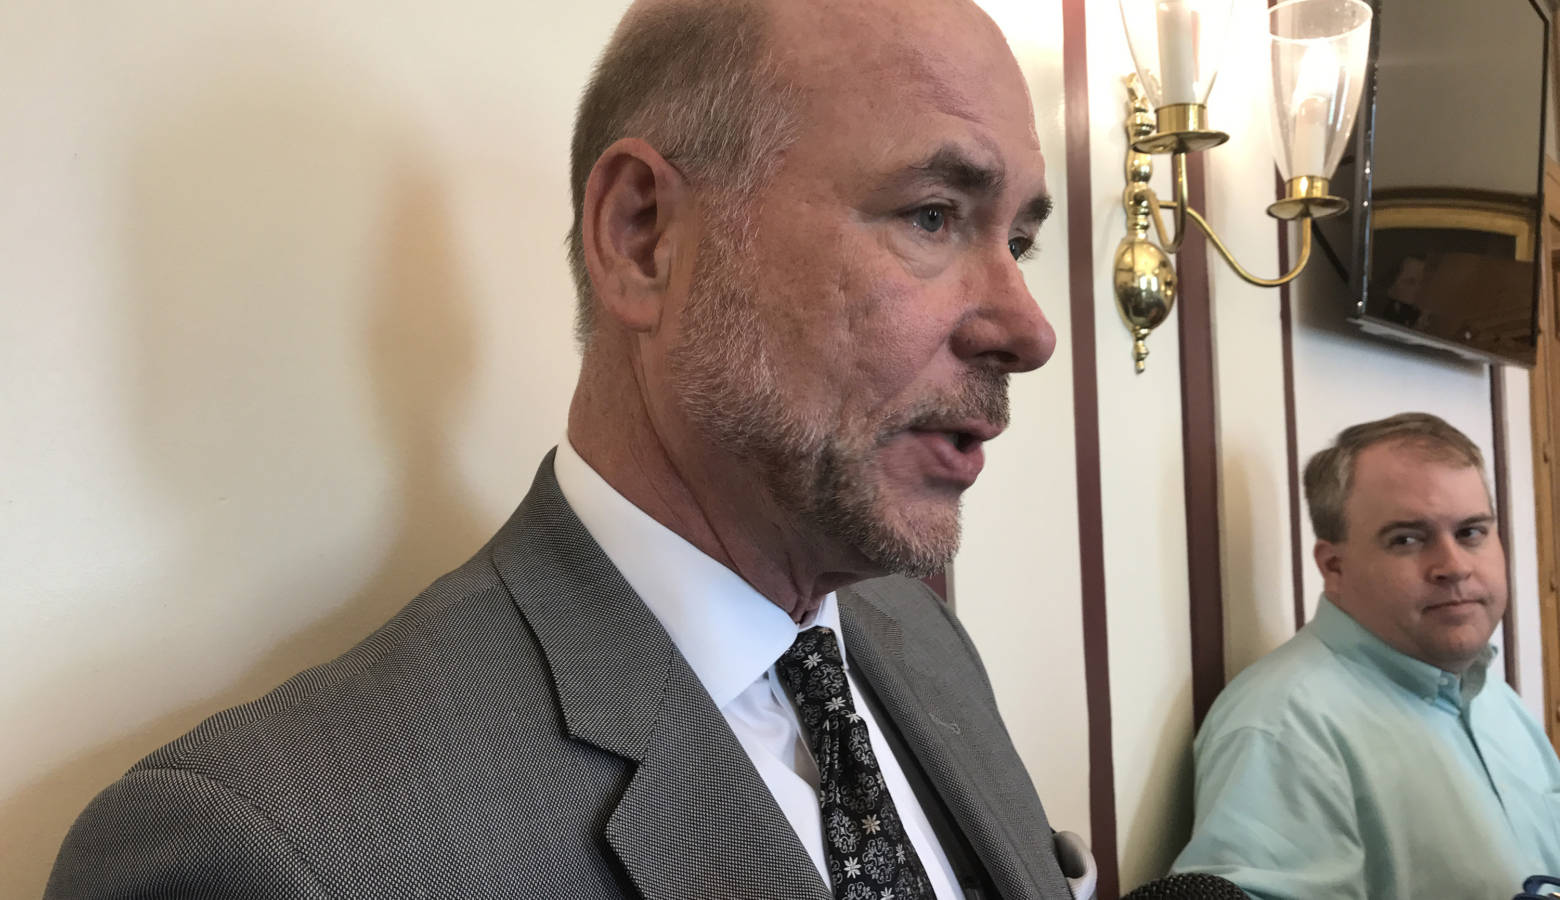 House Speaker Brian Bosma (R-Indianapolis) says he's not sure hate crimes need to be studied further. (Brandon Smith/IPB News)